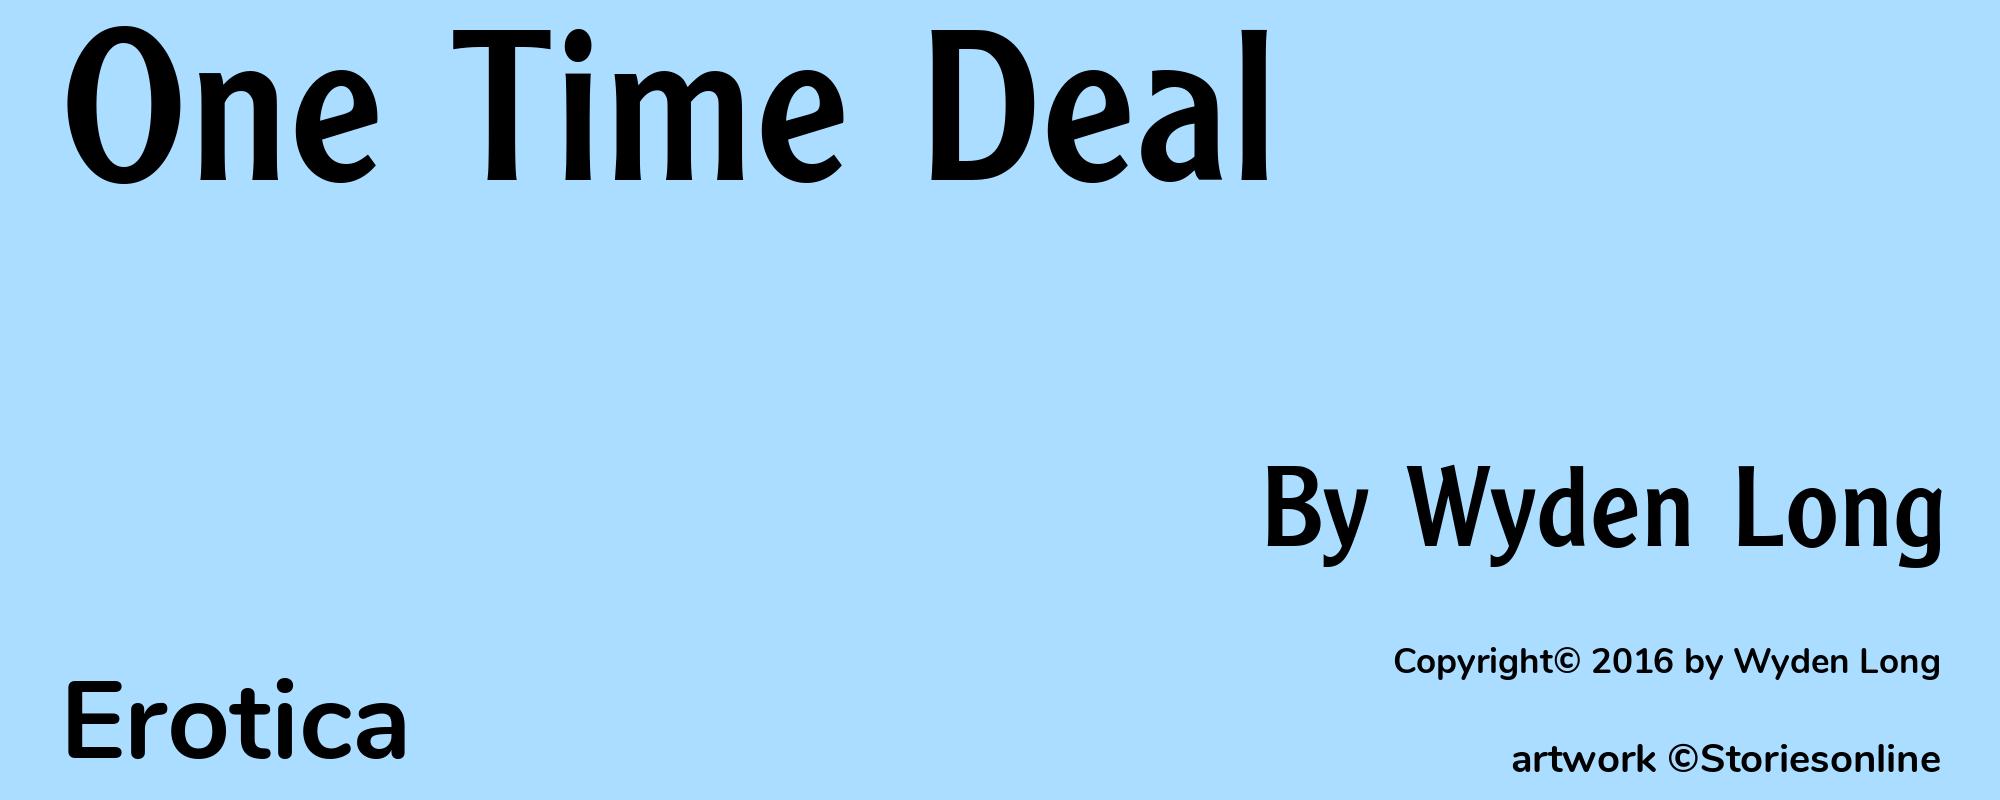 One Time Deal - Cover